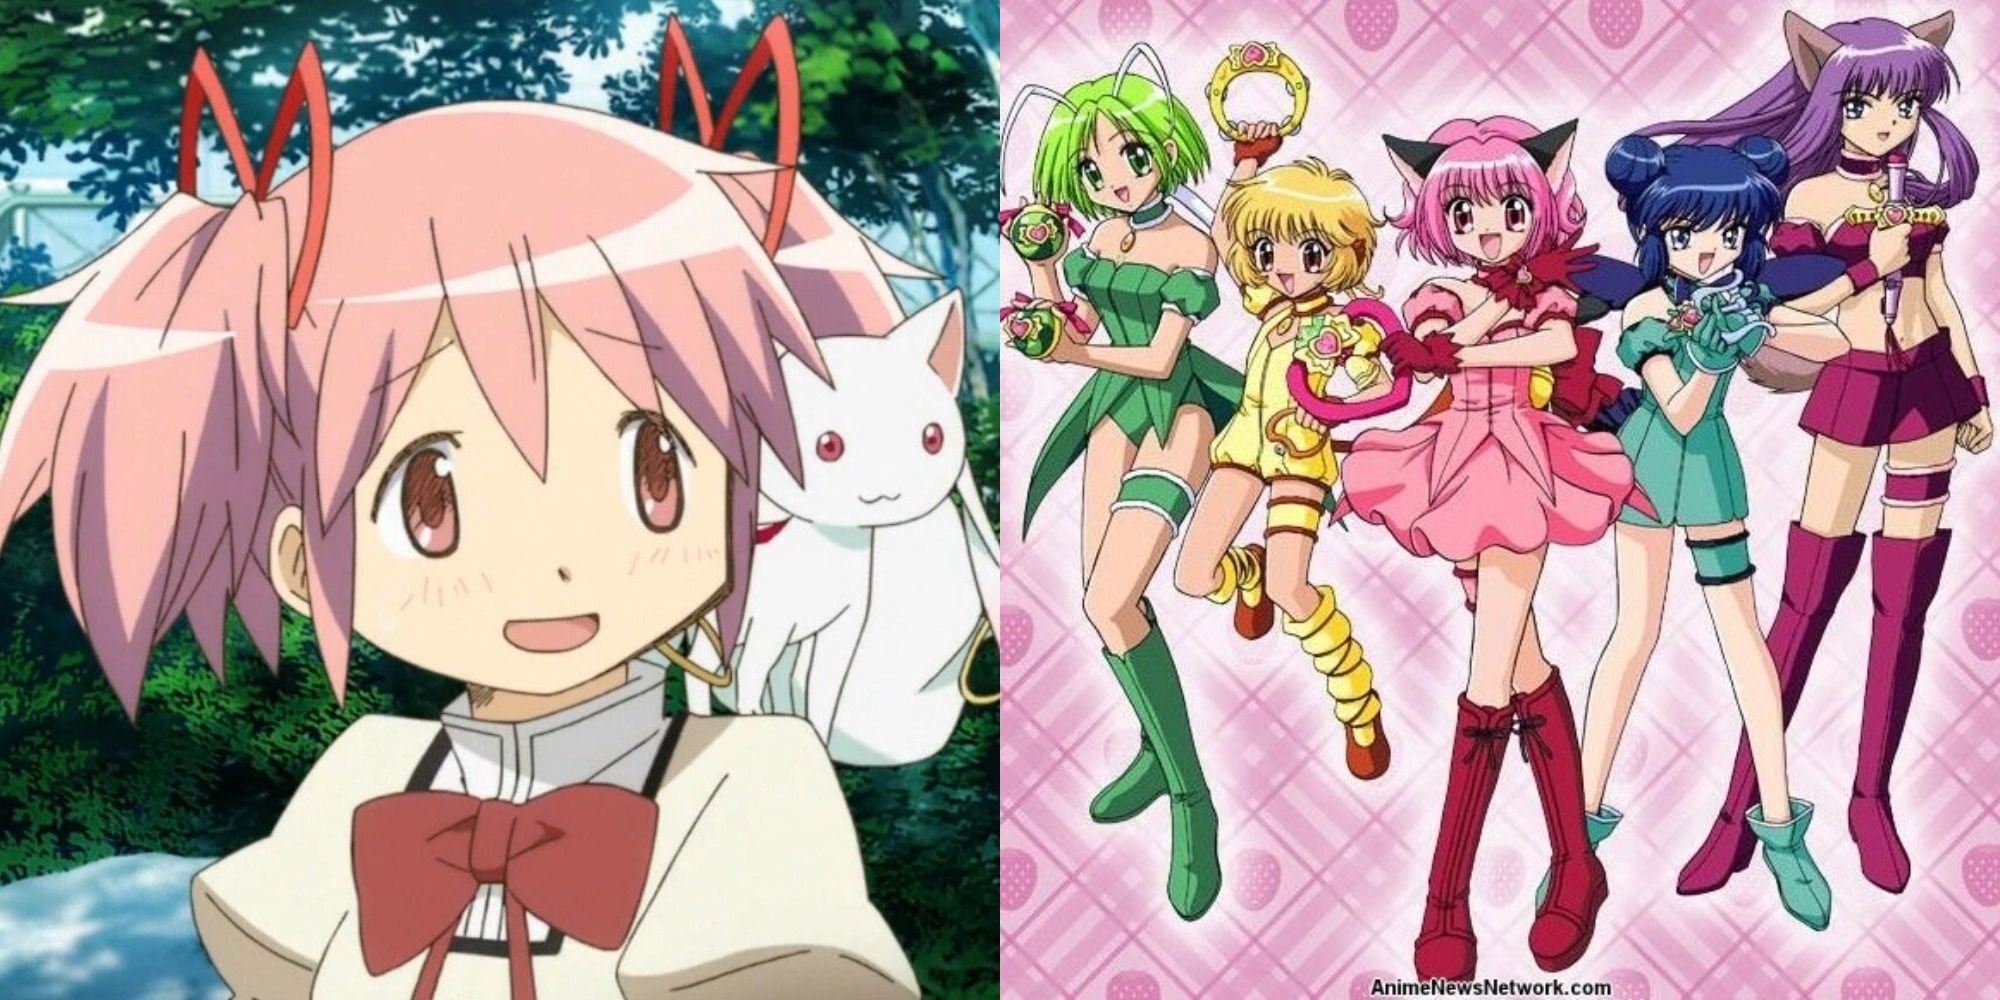 The Best Magical Girl Anime Series for Beginners